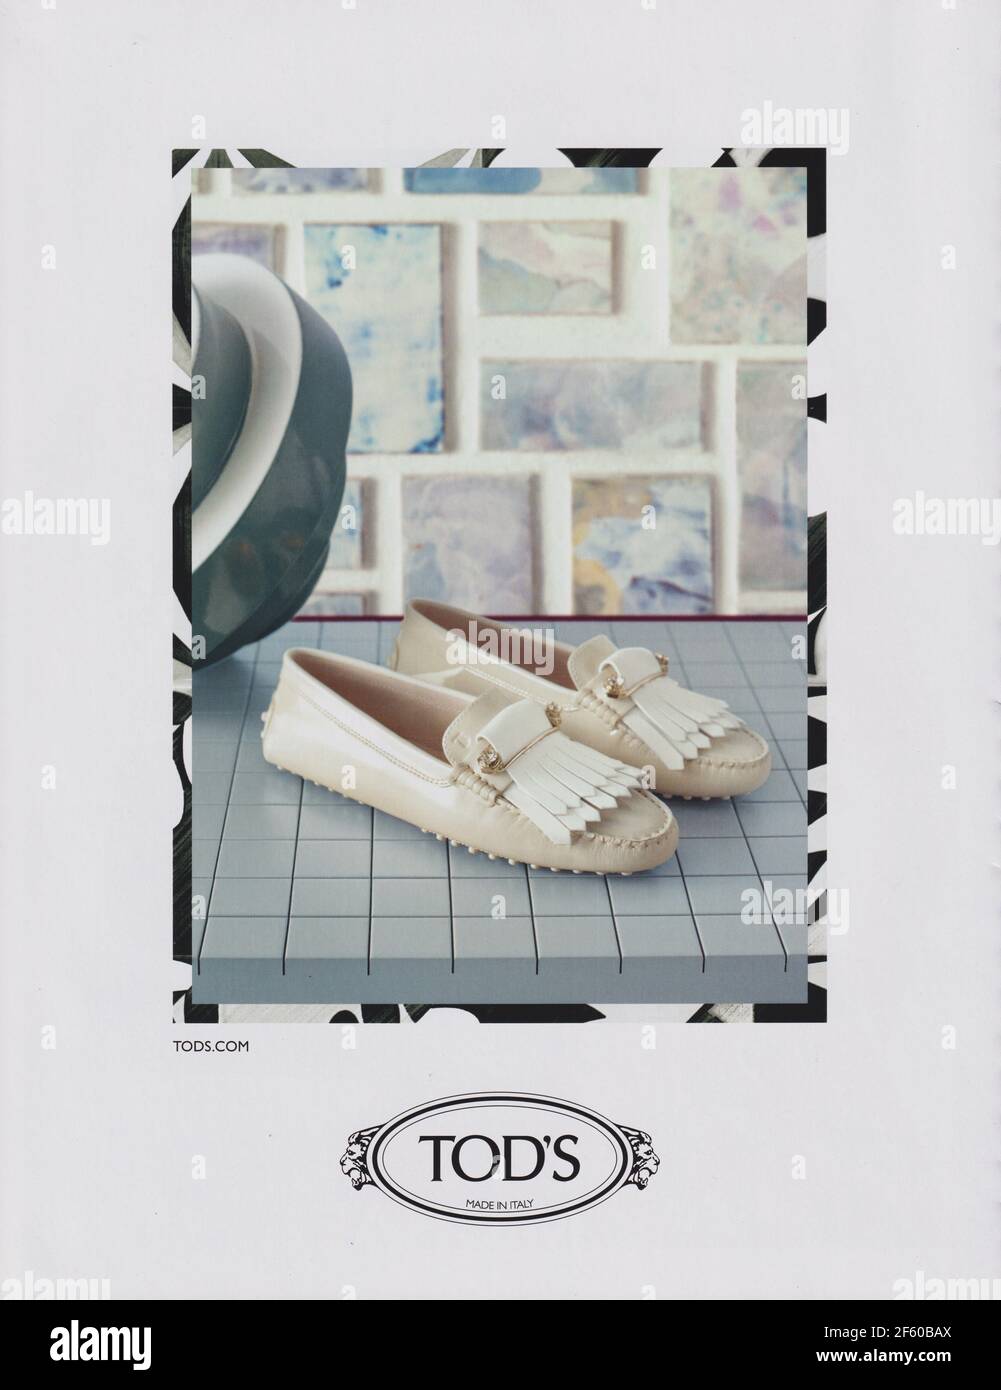 poster advertising Tod's fashion house in paper magazine from 2015 year, advertisement, creative Tod's advert from 2010s Stock Photo